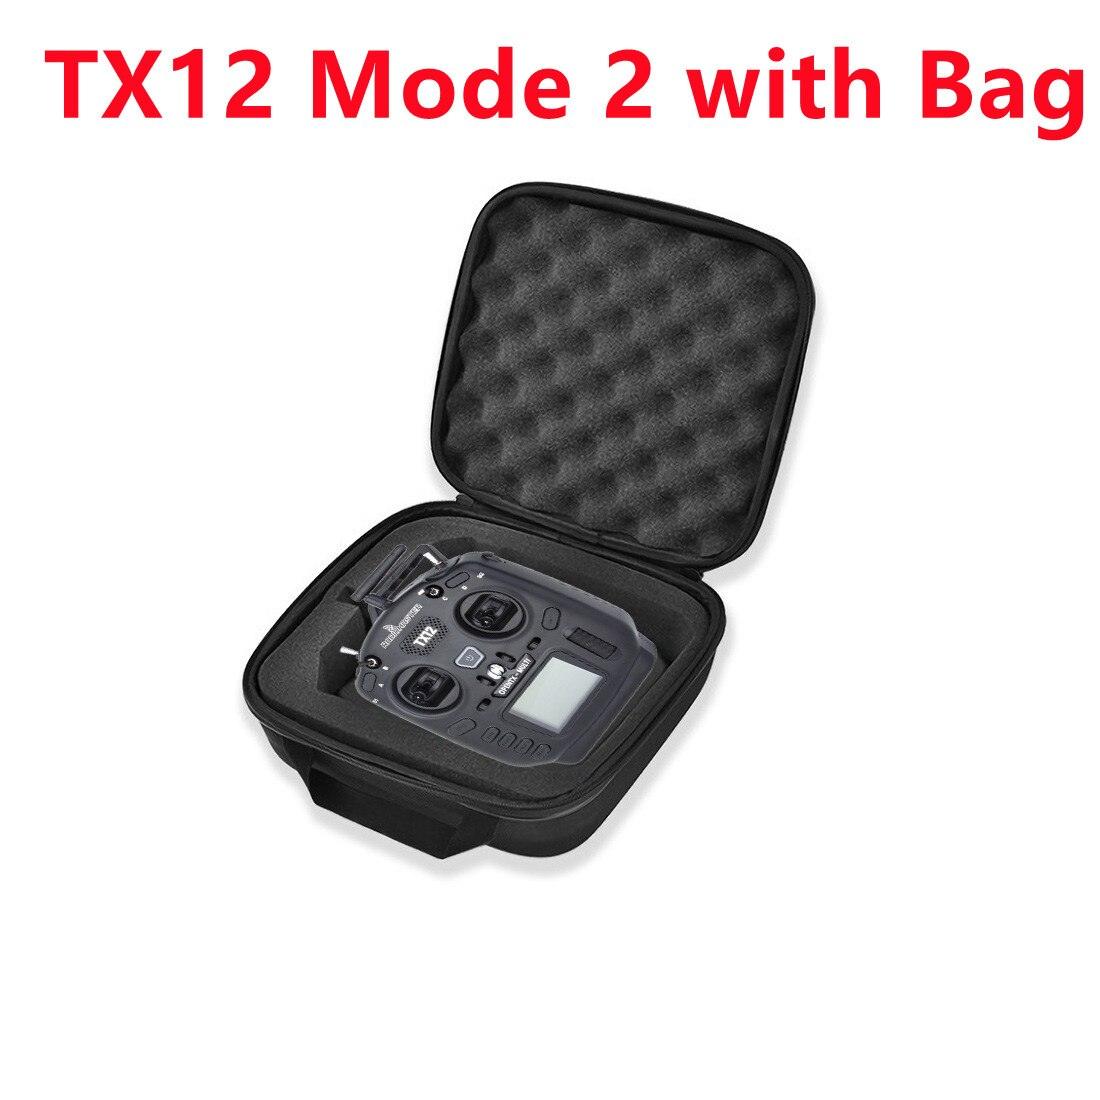 RadioMaster TX12 OpenTX Multi-Module 16ch Compatible Digital Proportional Radio System Transmitter for RC FPV Racing Drone - RCDrone